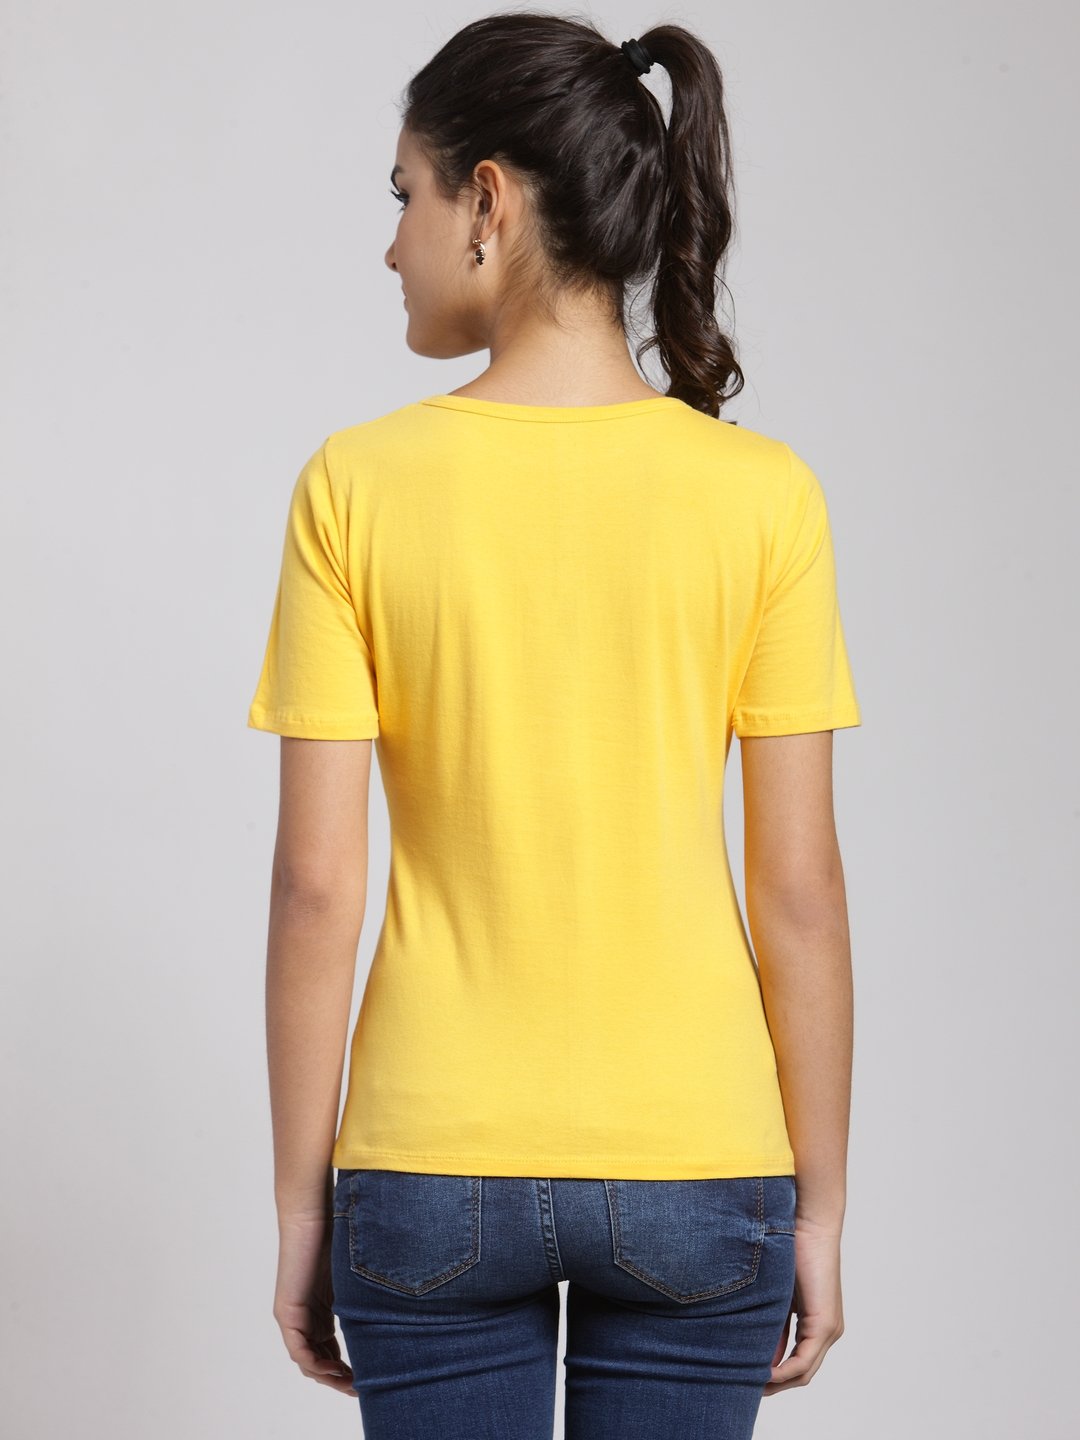 Yellow Solid Top